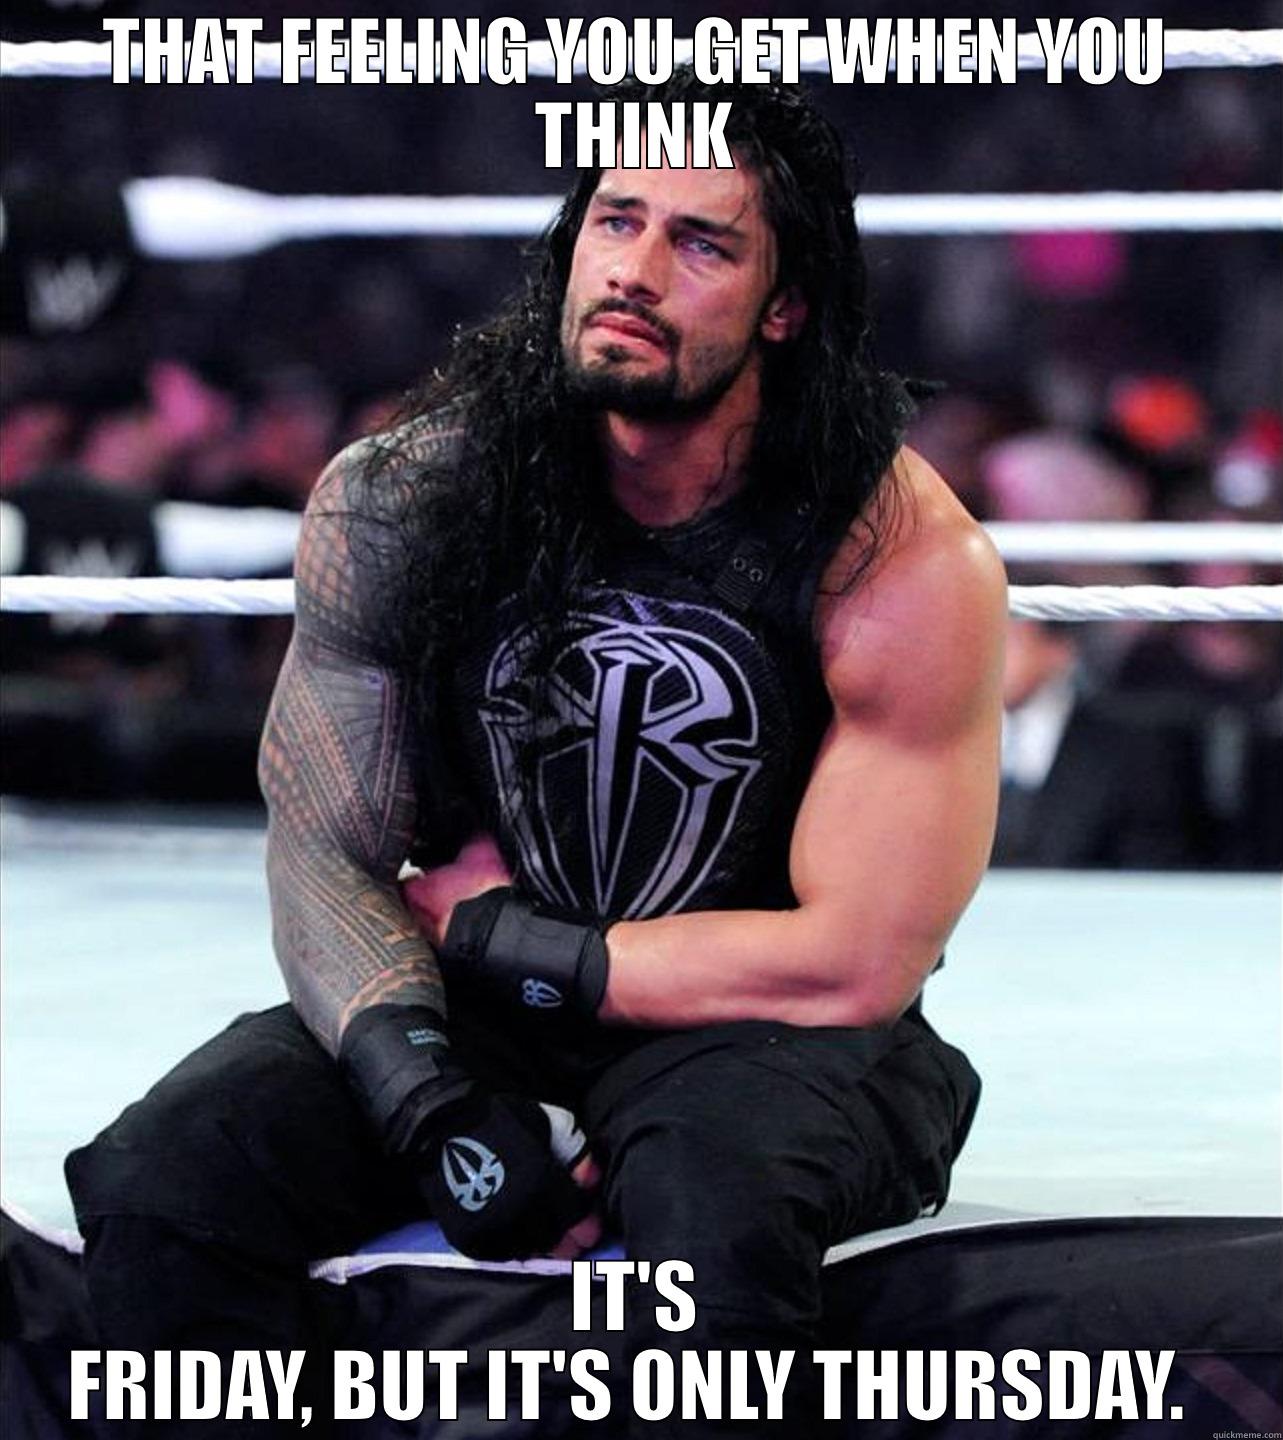 Roman Reigns is Sad - THAT FEELING YOU GET WHEN YOU THINK IT'S FRIDAY, BUT IT'S ONLY THURSDAY.  Misc